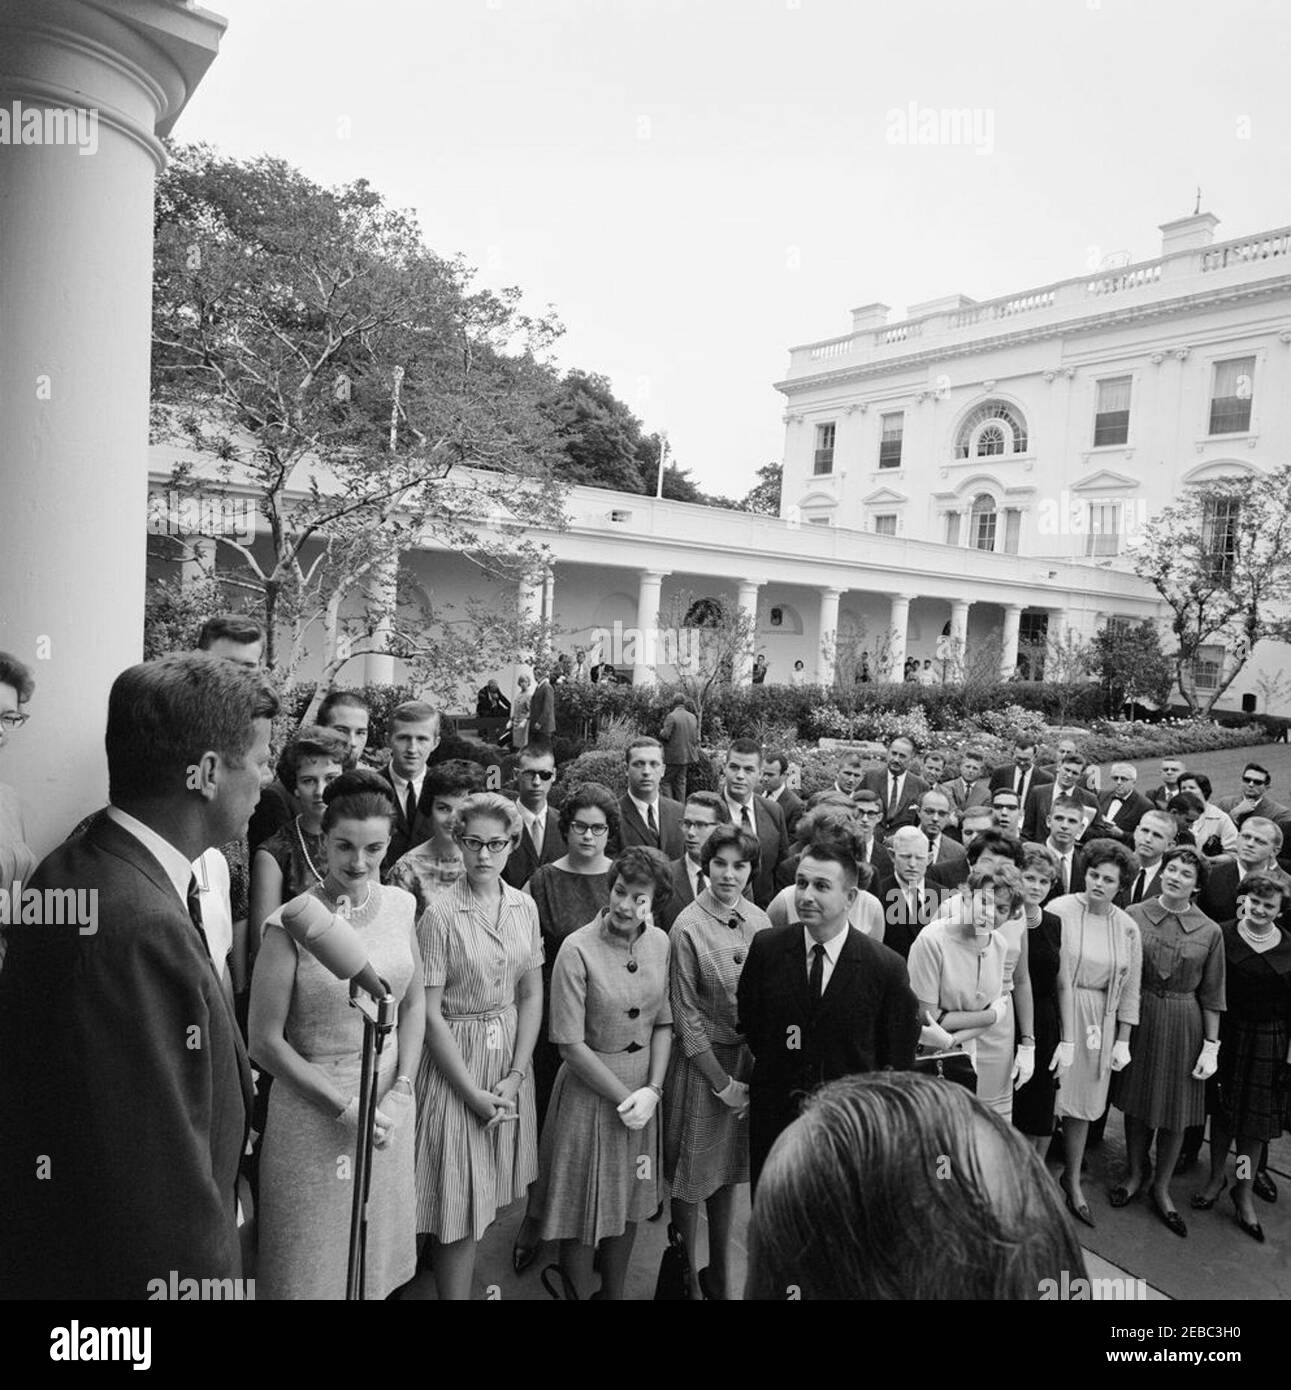 Visit of members of the Schola Cantorum, University of Arkansas, 12:15PM. President John F. Kennedy (left, at microphones) delivers remarks to members of the University of Arkansas Schola Cantorum in the Rose Garden of the White House, Washington, D.C.; founding director of the Schola Cantorum, Richard Brothers, stands at right. The choir visited the White House after winning first prize at the Guido du0027Arezzo International Polyphonic Competition in Arezzo, Italy. Stock Photo